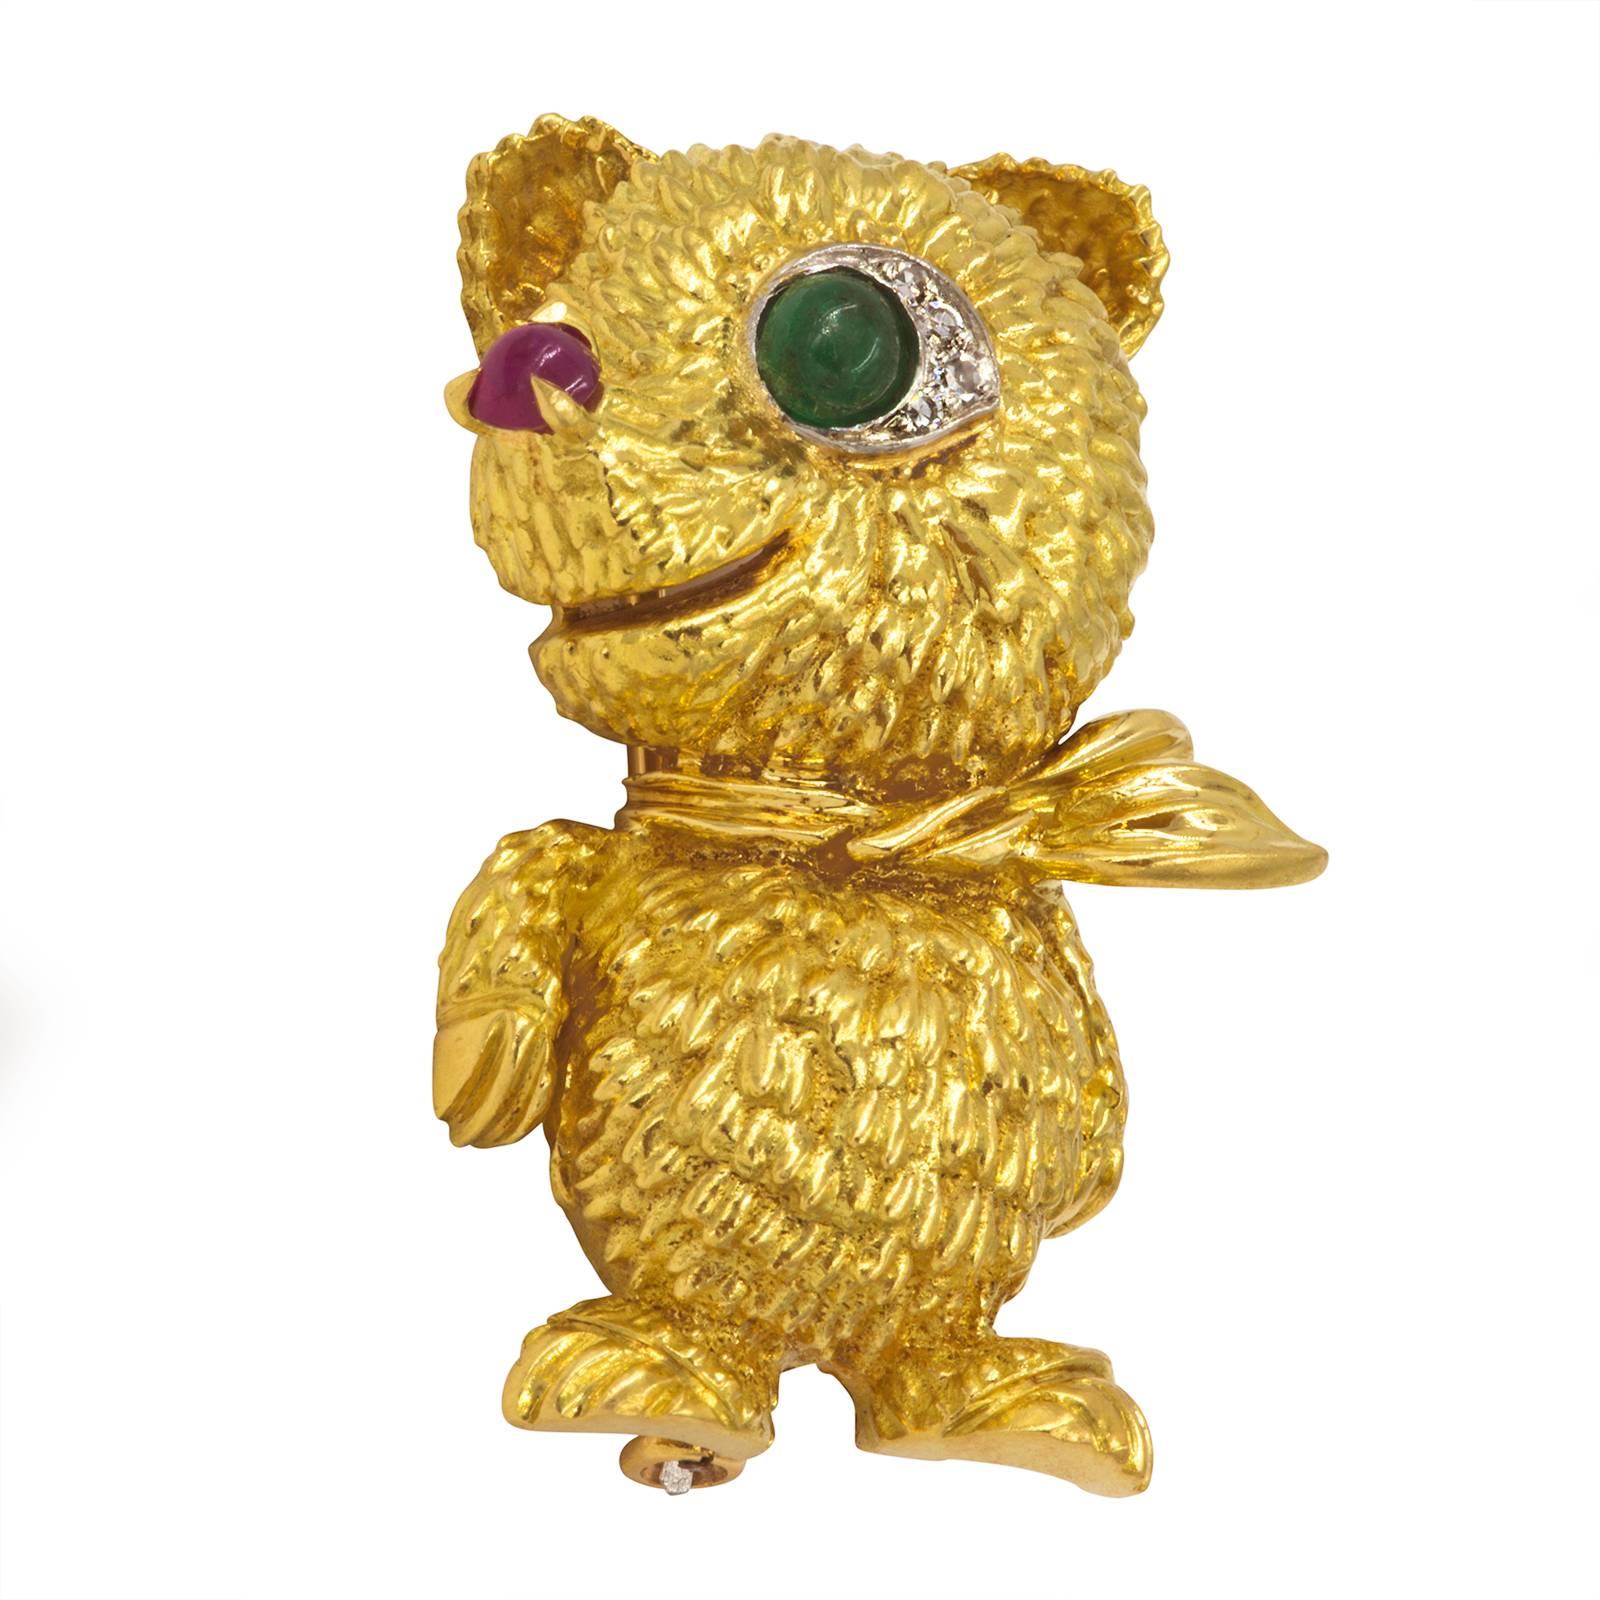 Sassy  bear dressed with a tie.  750, 18k yellow gold, from 1950s.
Cabochon emerald eye with diamond lashes.  Bright cabochon red ruby nose.
Hallmarks on backside 